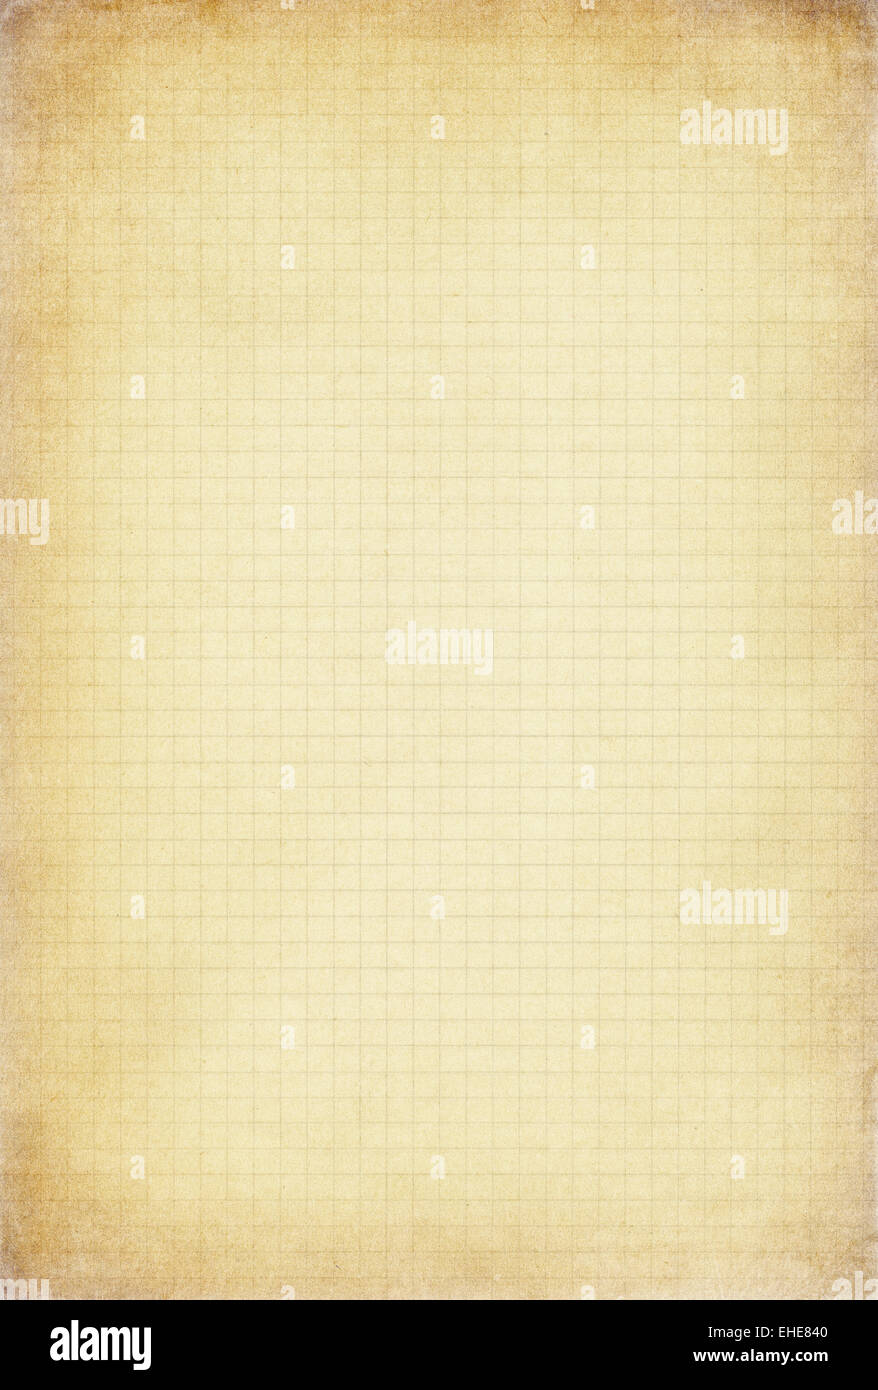 Vintage old cell paper background. Stock Photo